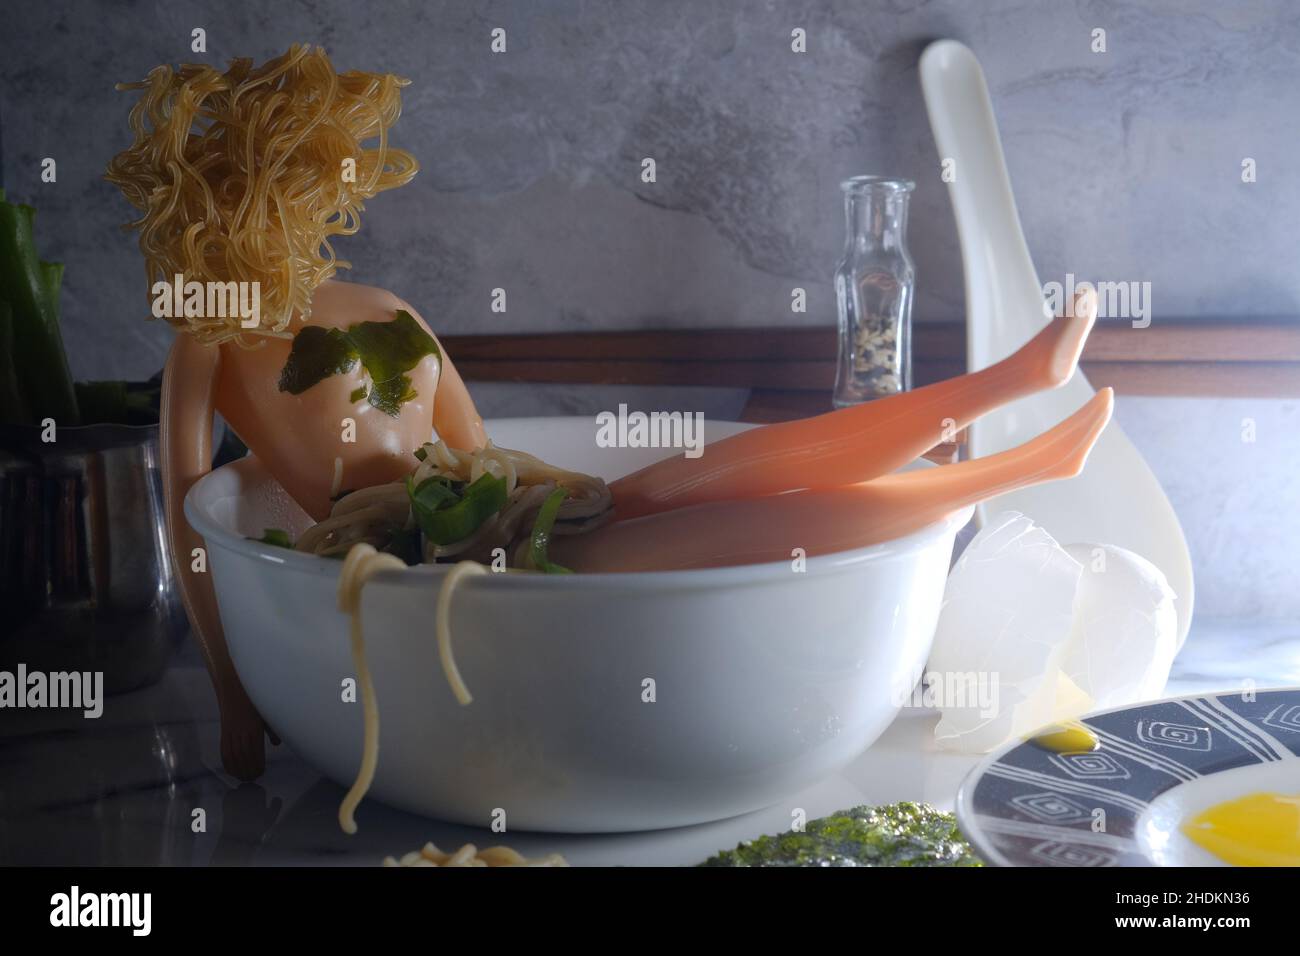 Relaxed doll bathes in Japanese ramen noodles concept Stock Photo